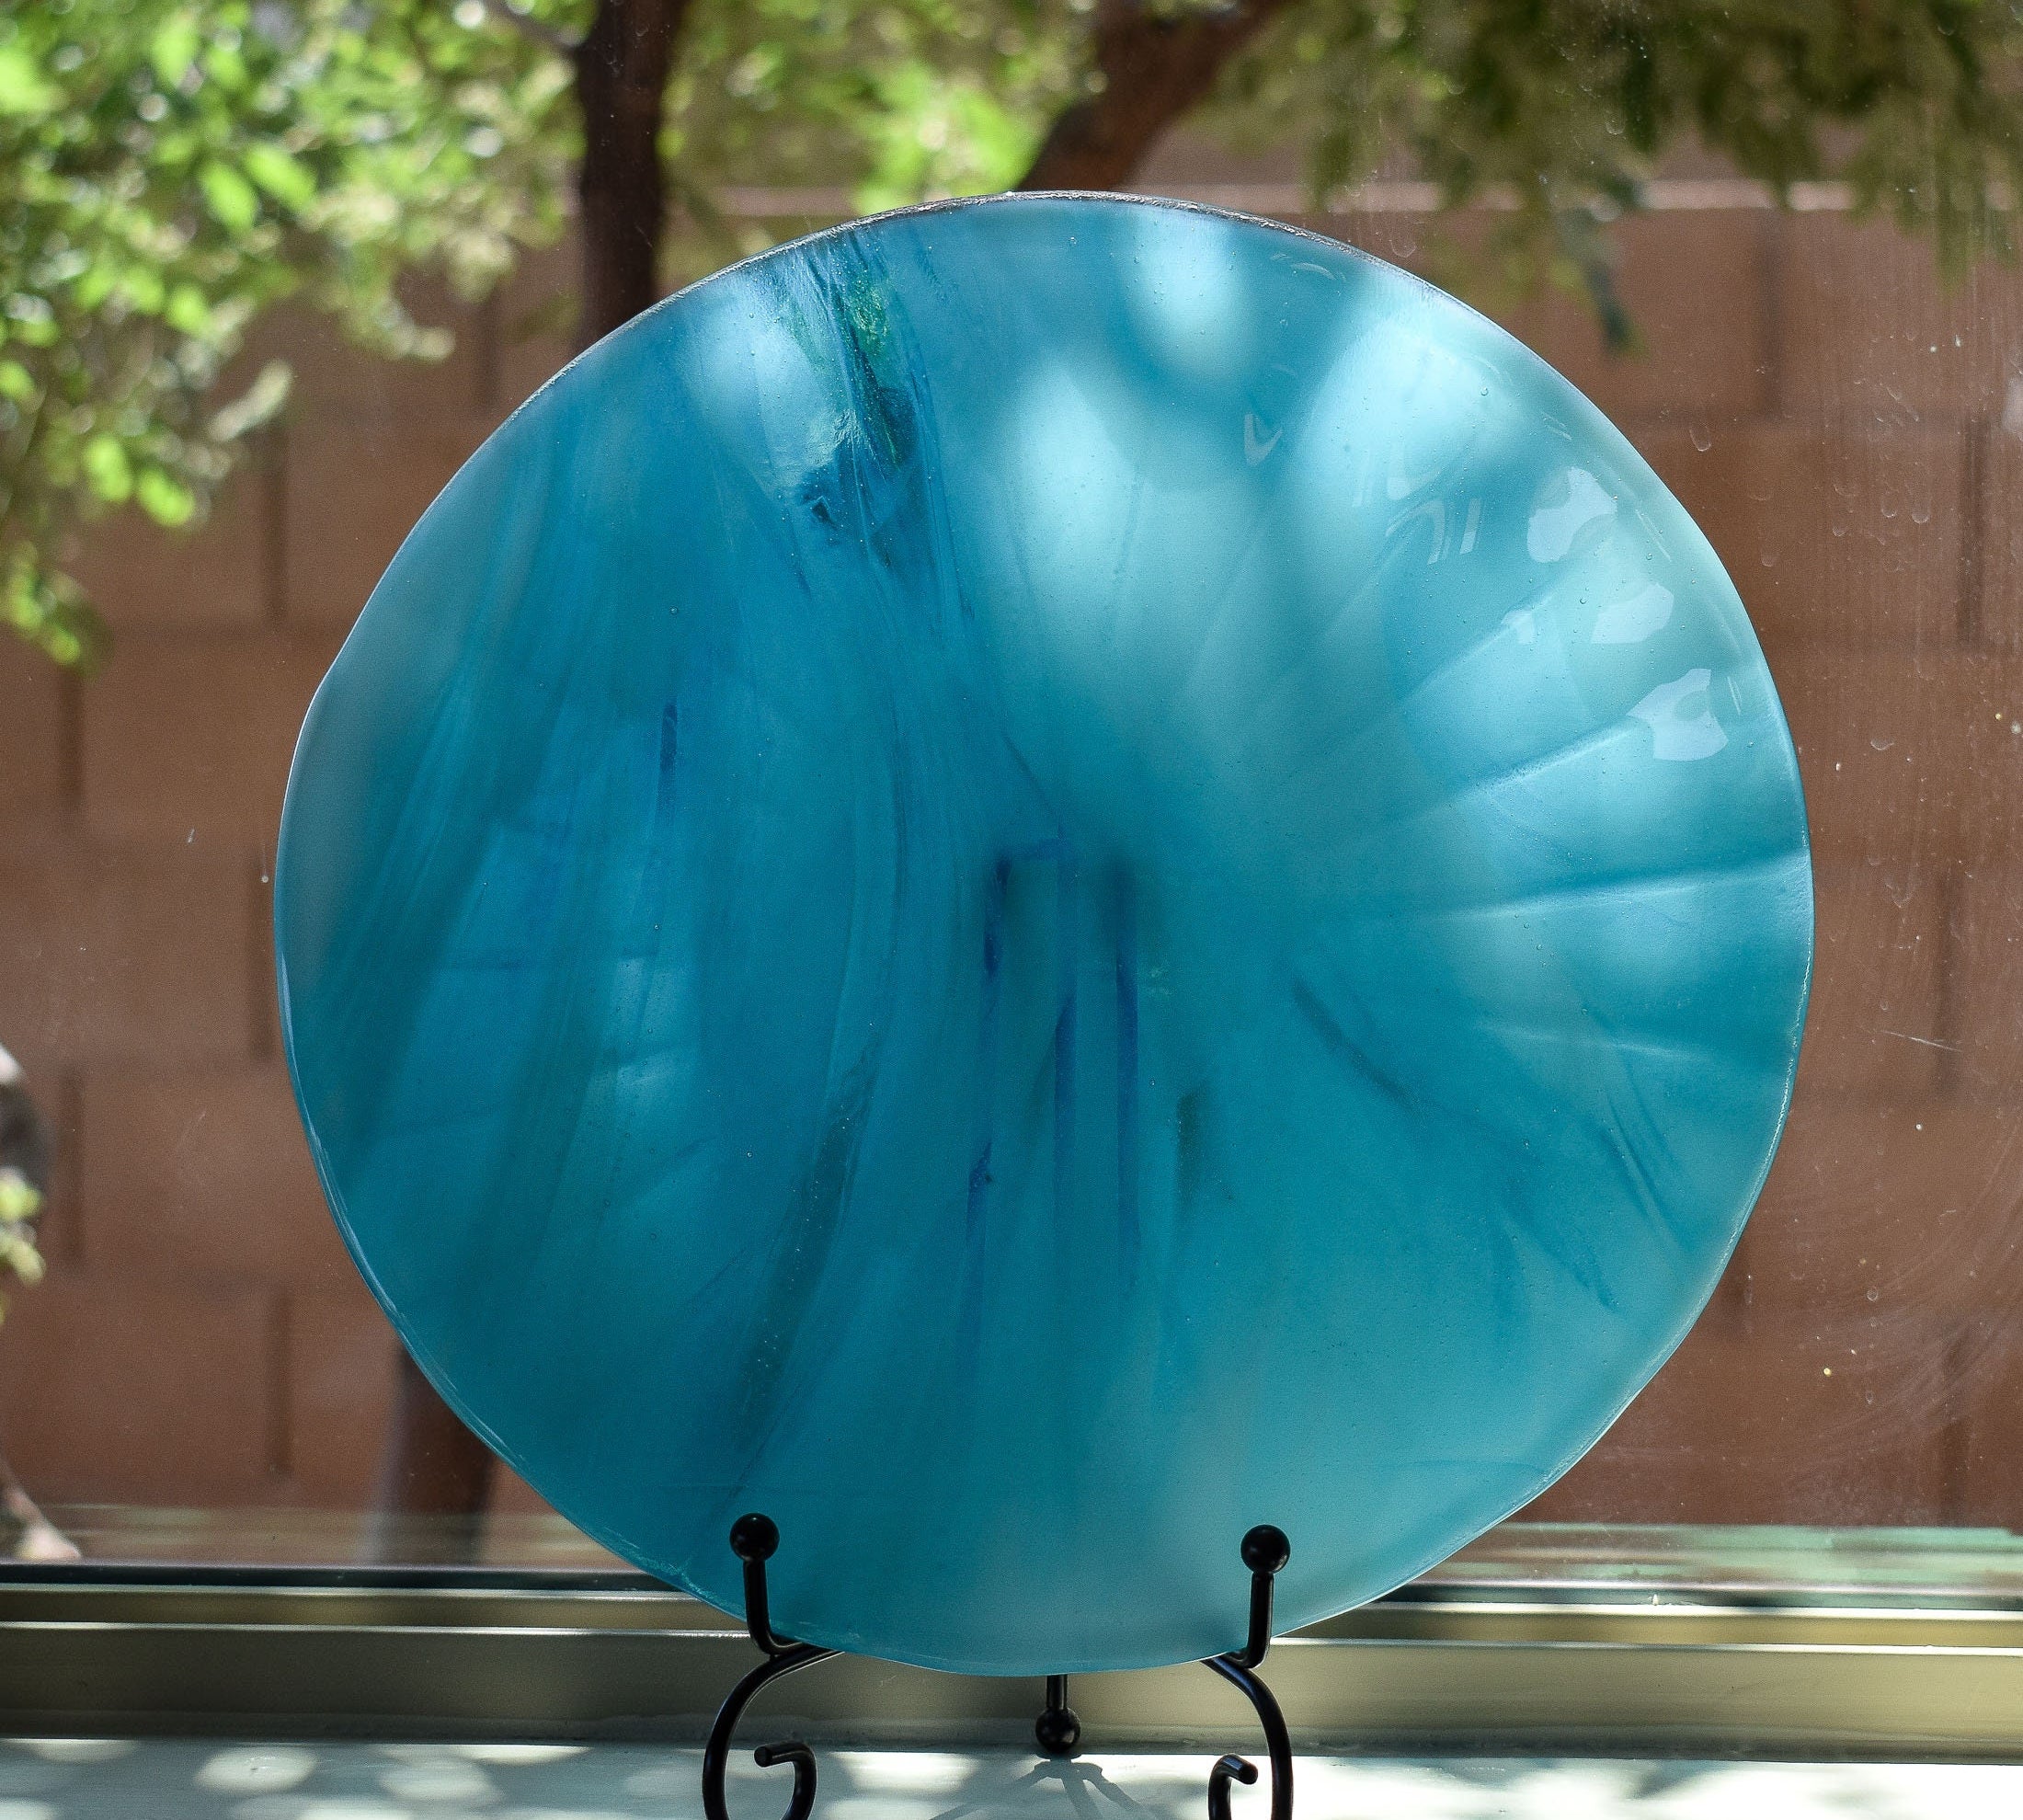 Large, round turquoise blue glass dish with ruffled edges placed in stand in window.